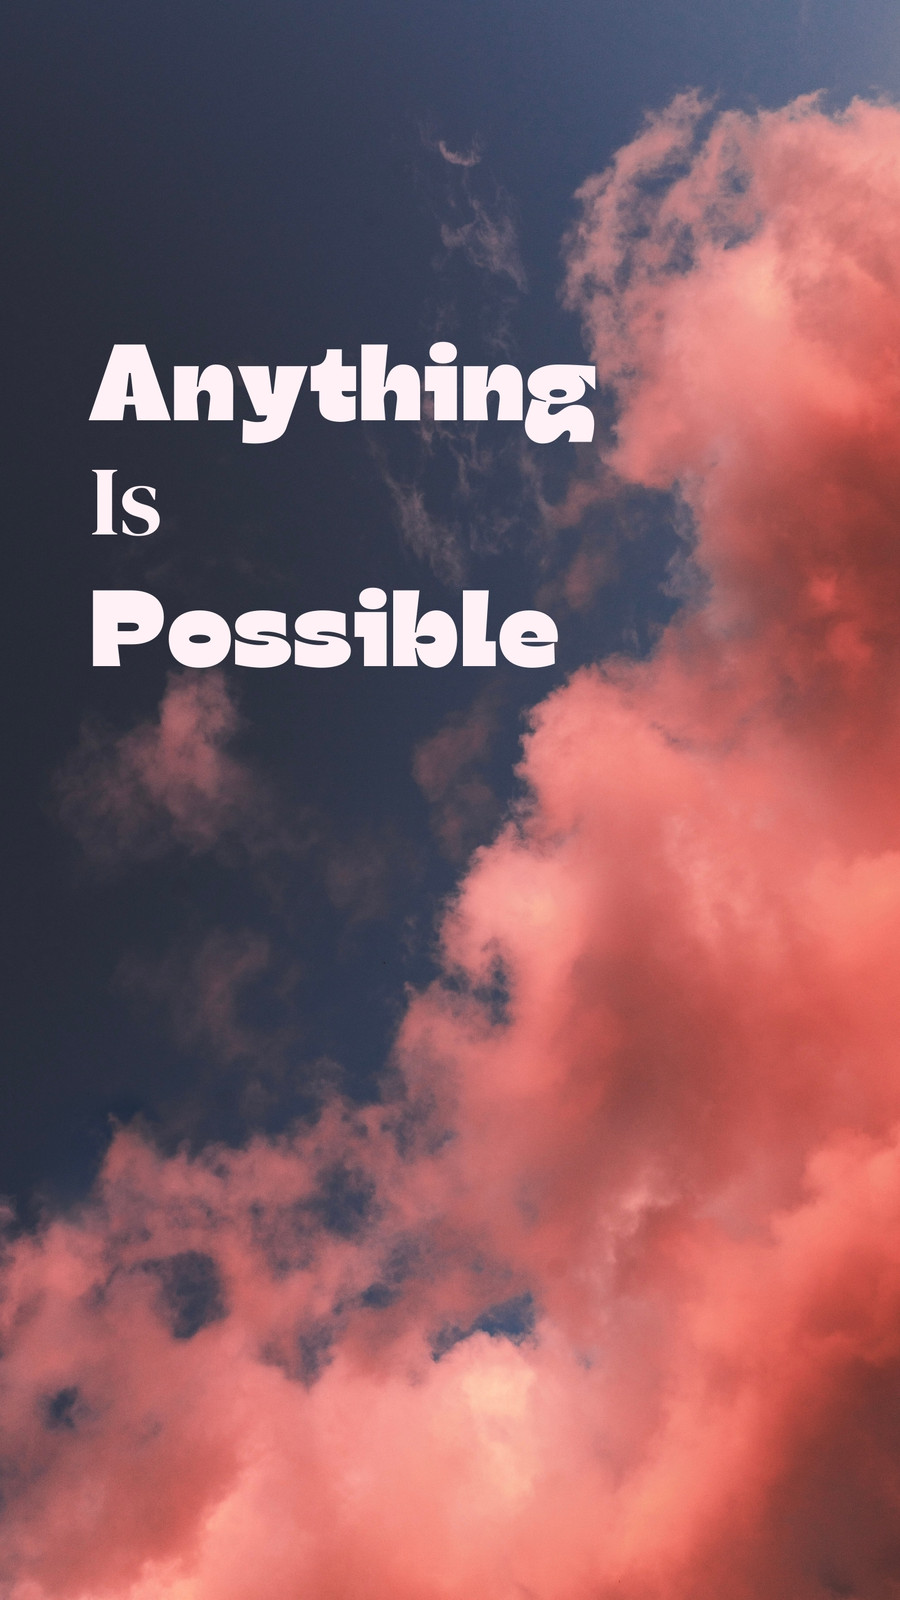 Anonymous Quote: “Everything is possible for him who believes.”